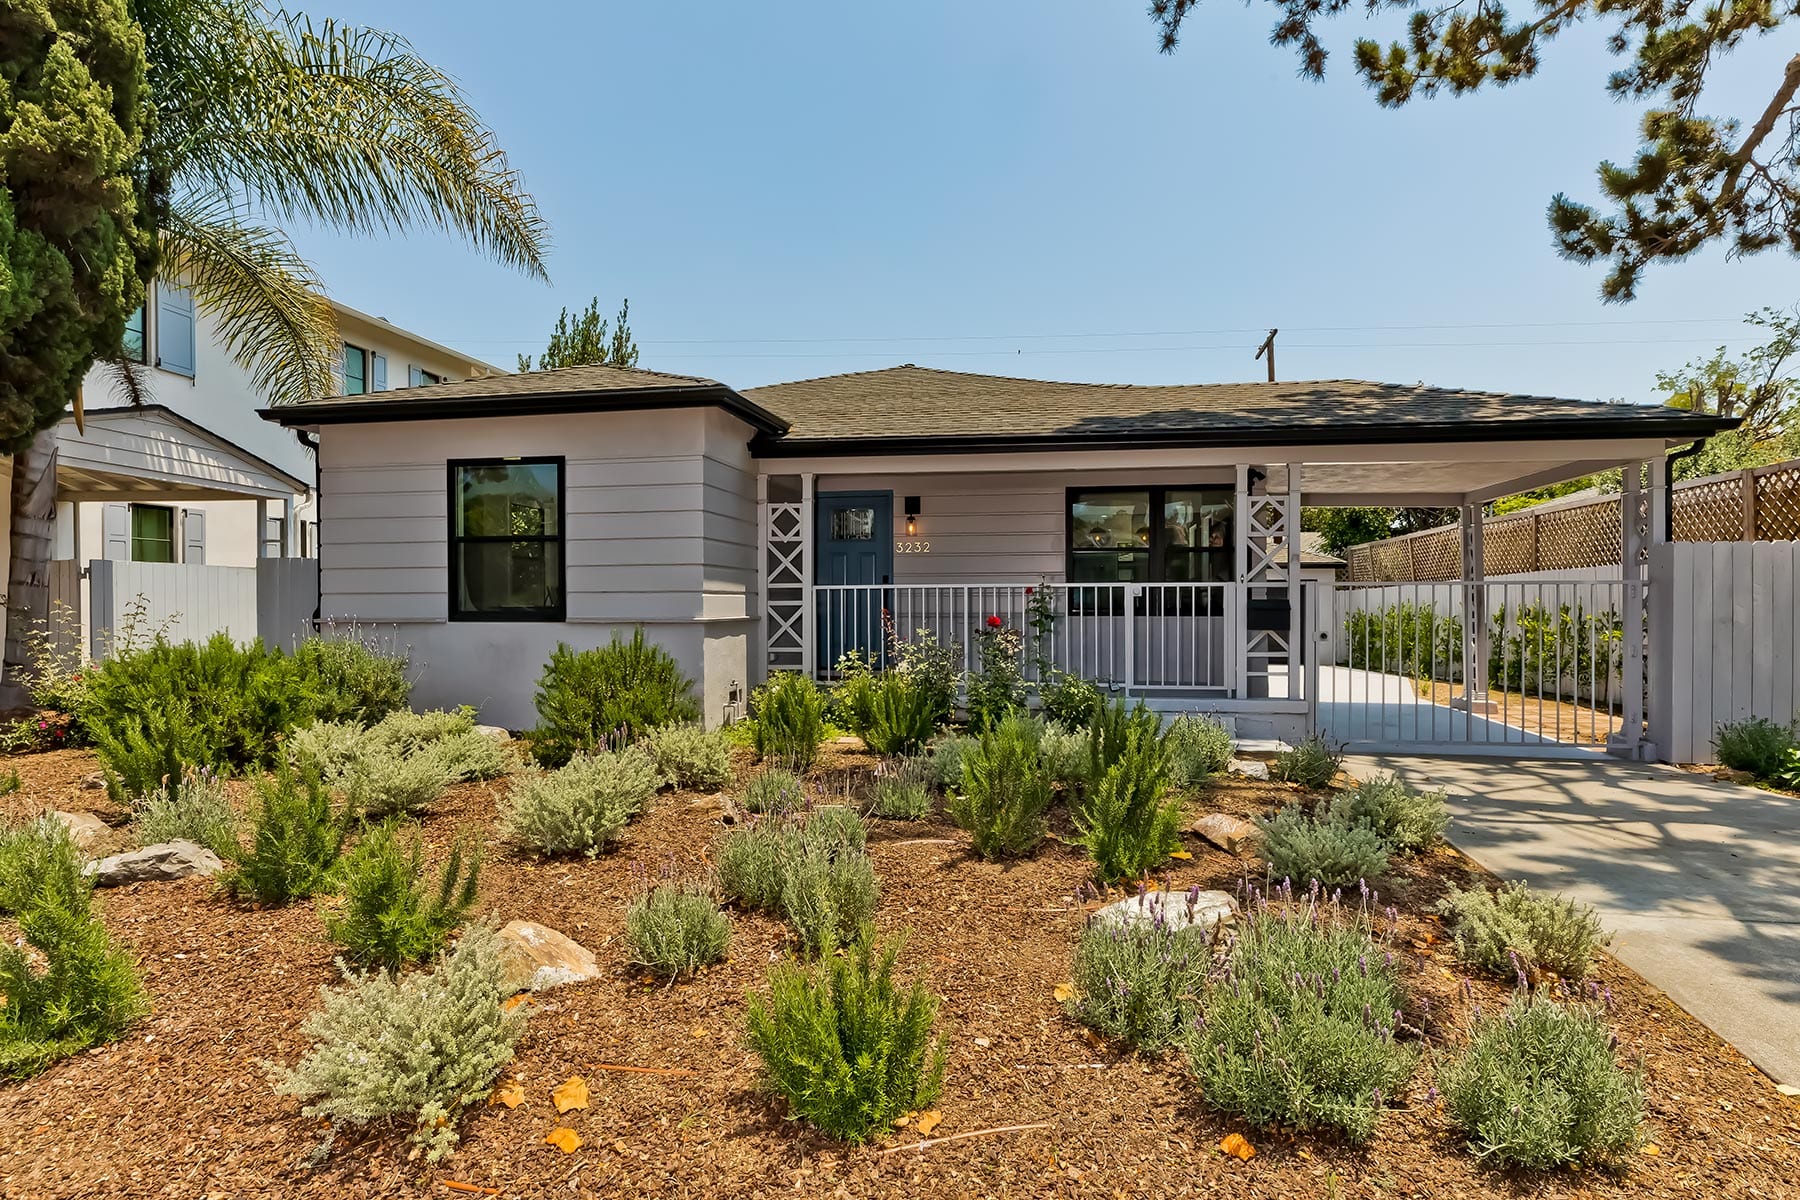 3232 S. Beverly Dr., Beverlywood-2